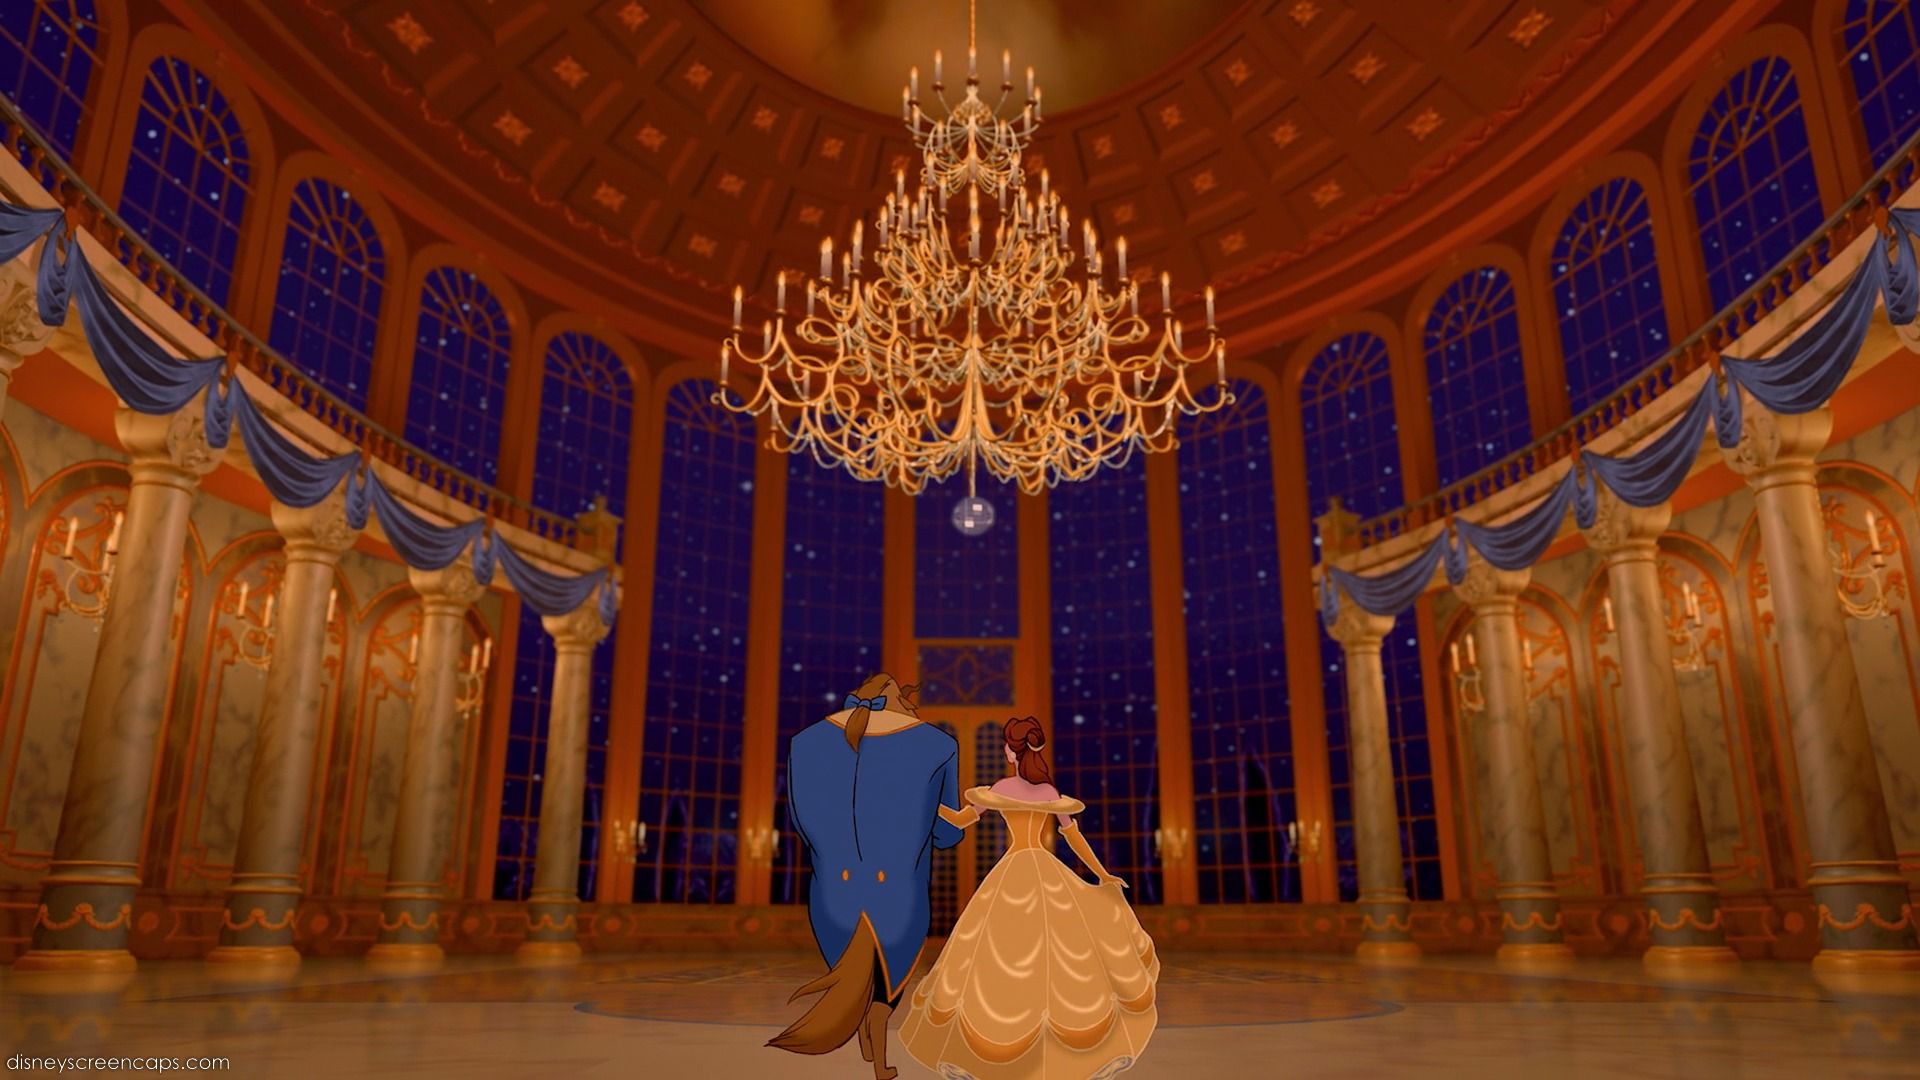 Beauty And The Beast Hd Wallpapers - Beauty And The Beast Ballroom - HD Wallpaper 